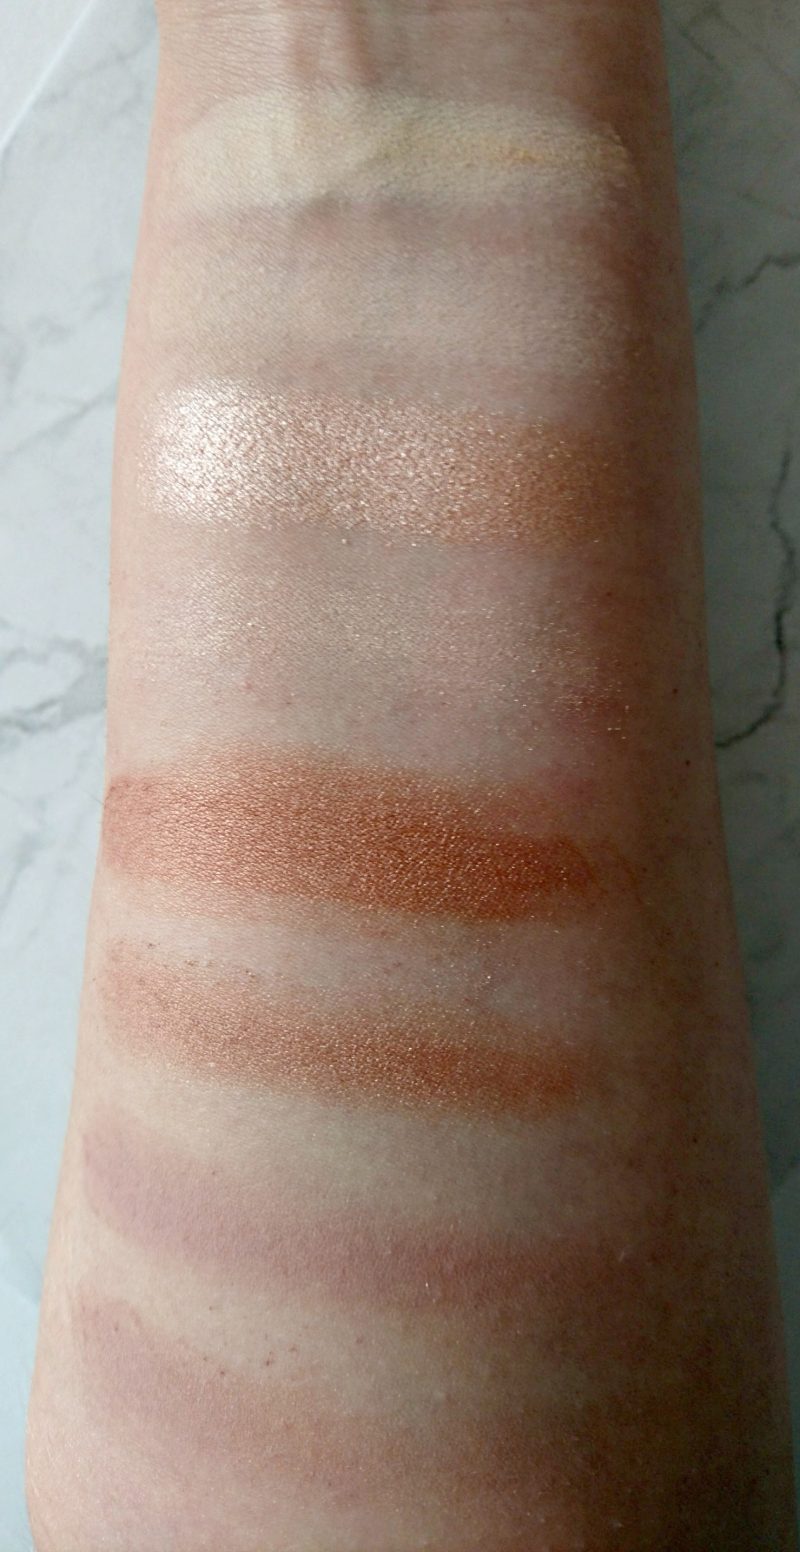 Lotique makeup eyeshadow palette swatches